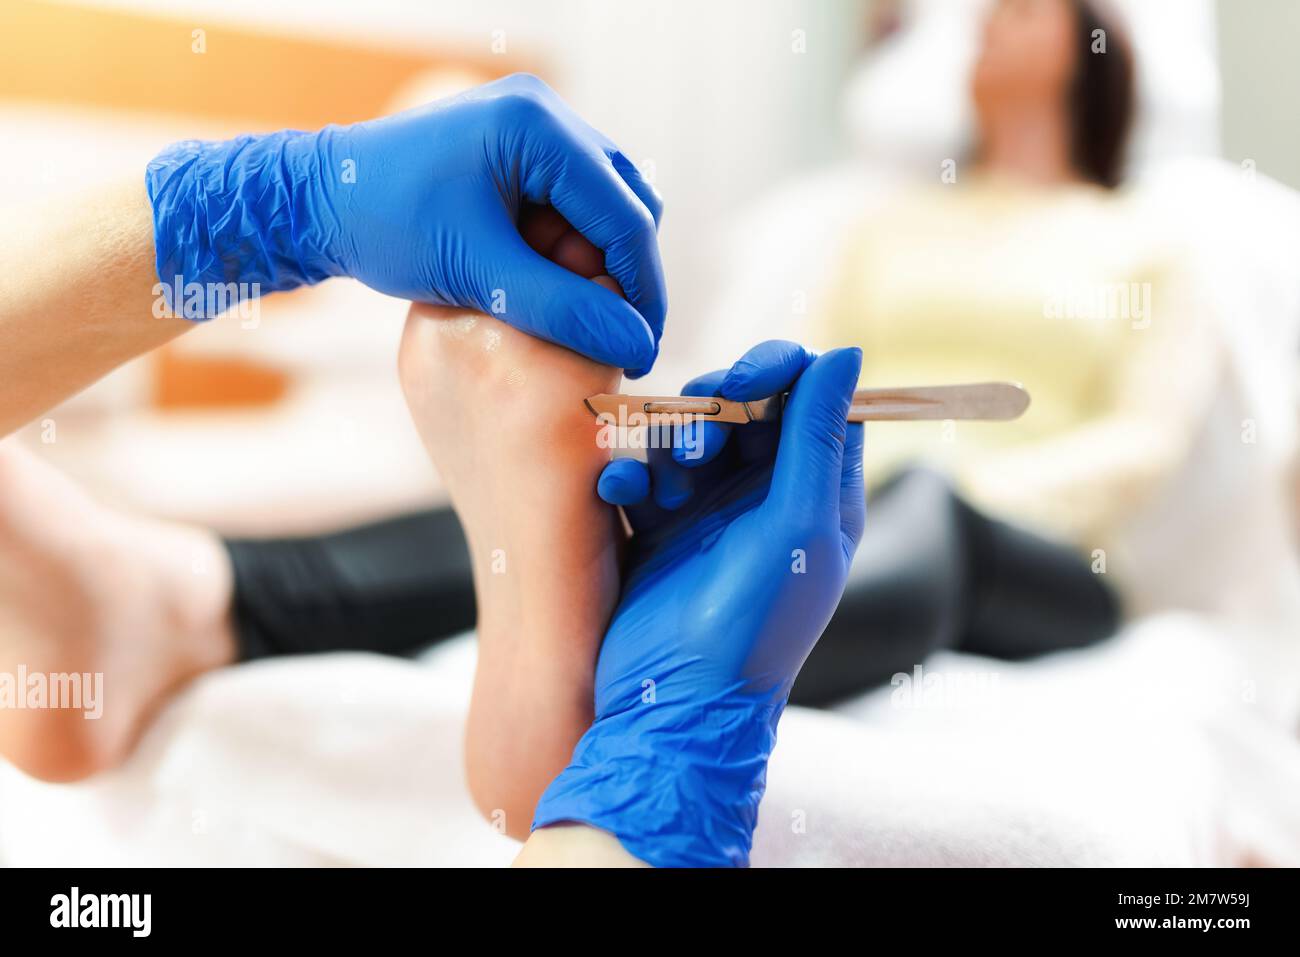 Professional pedicure using dieffenbach scalpel.Patient visiting  podiatrist.Medical pedicure procedure using special instrument with blade  knife holde Stock Photo - Alamy